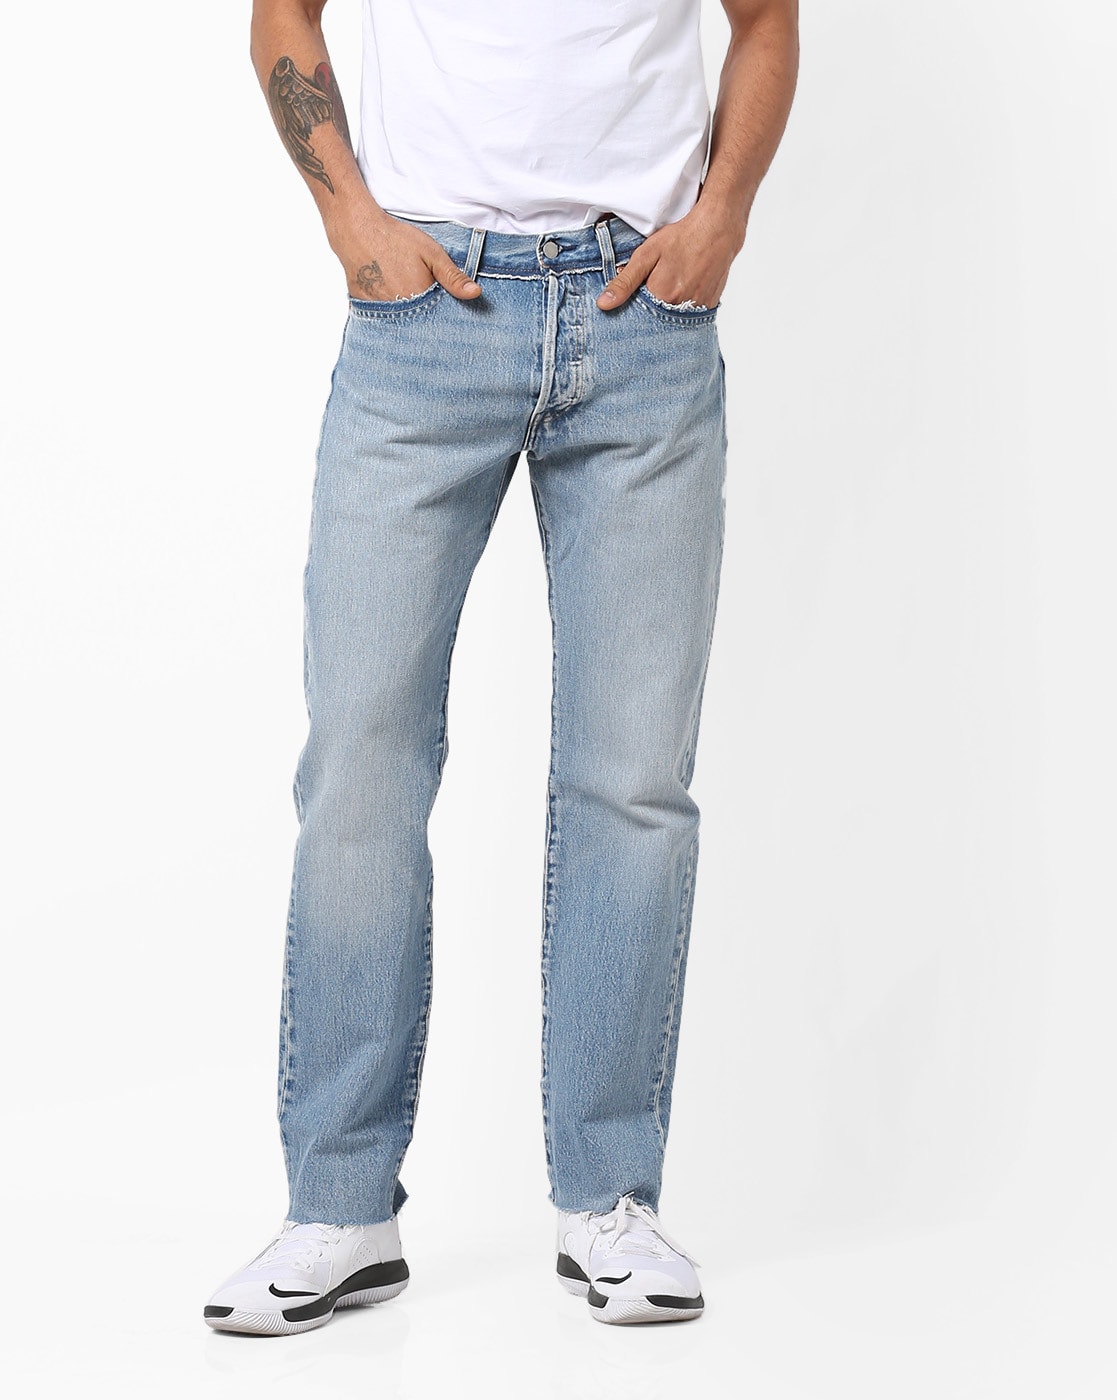 levi's straight fit jeans mens